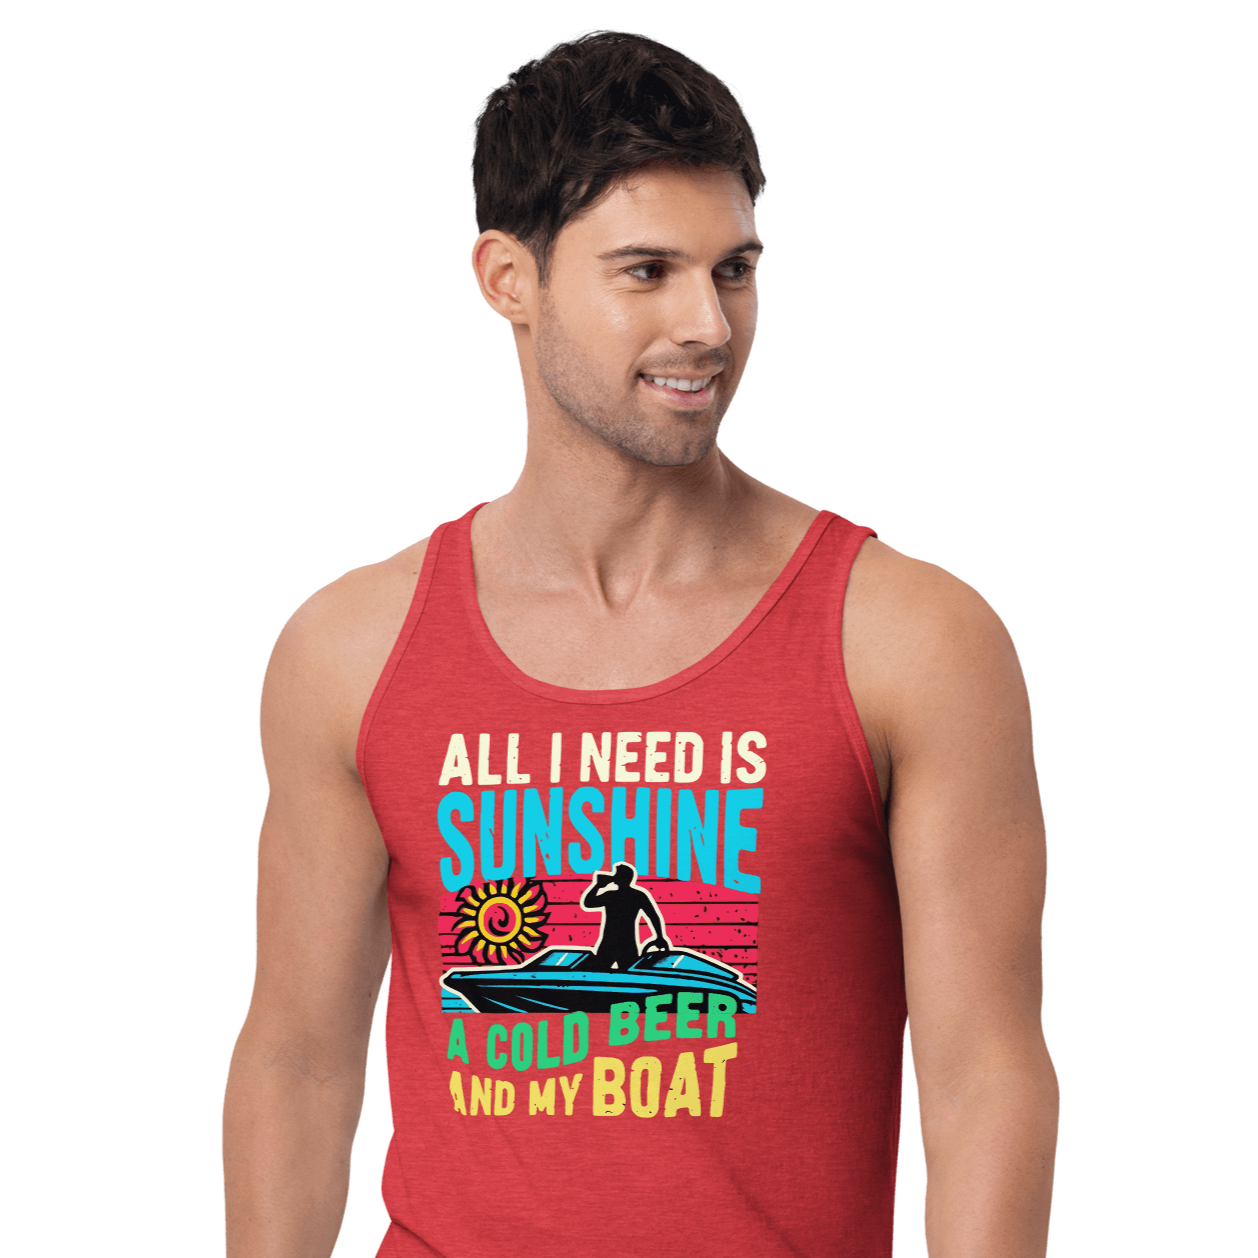 Men's tank top with "All I Need Is Sunshine, a Cold Beer, and My Boat," showing a man in a boat at sunset.